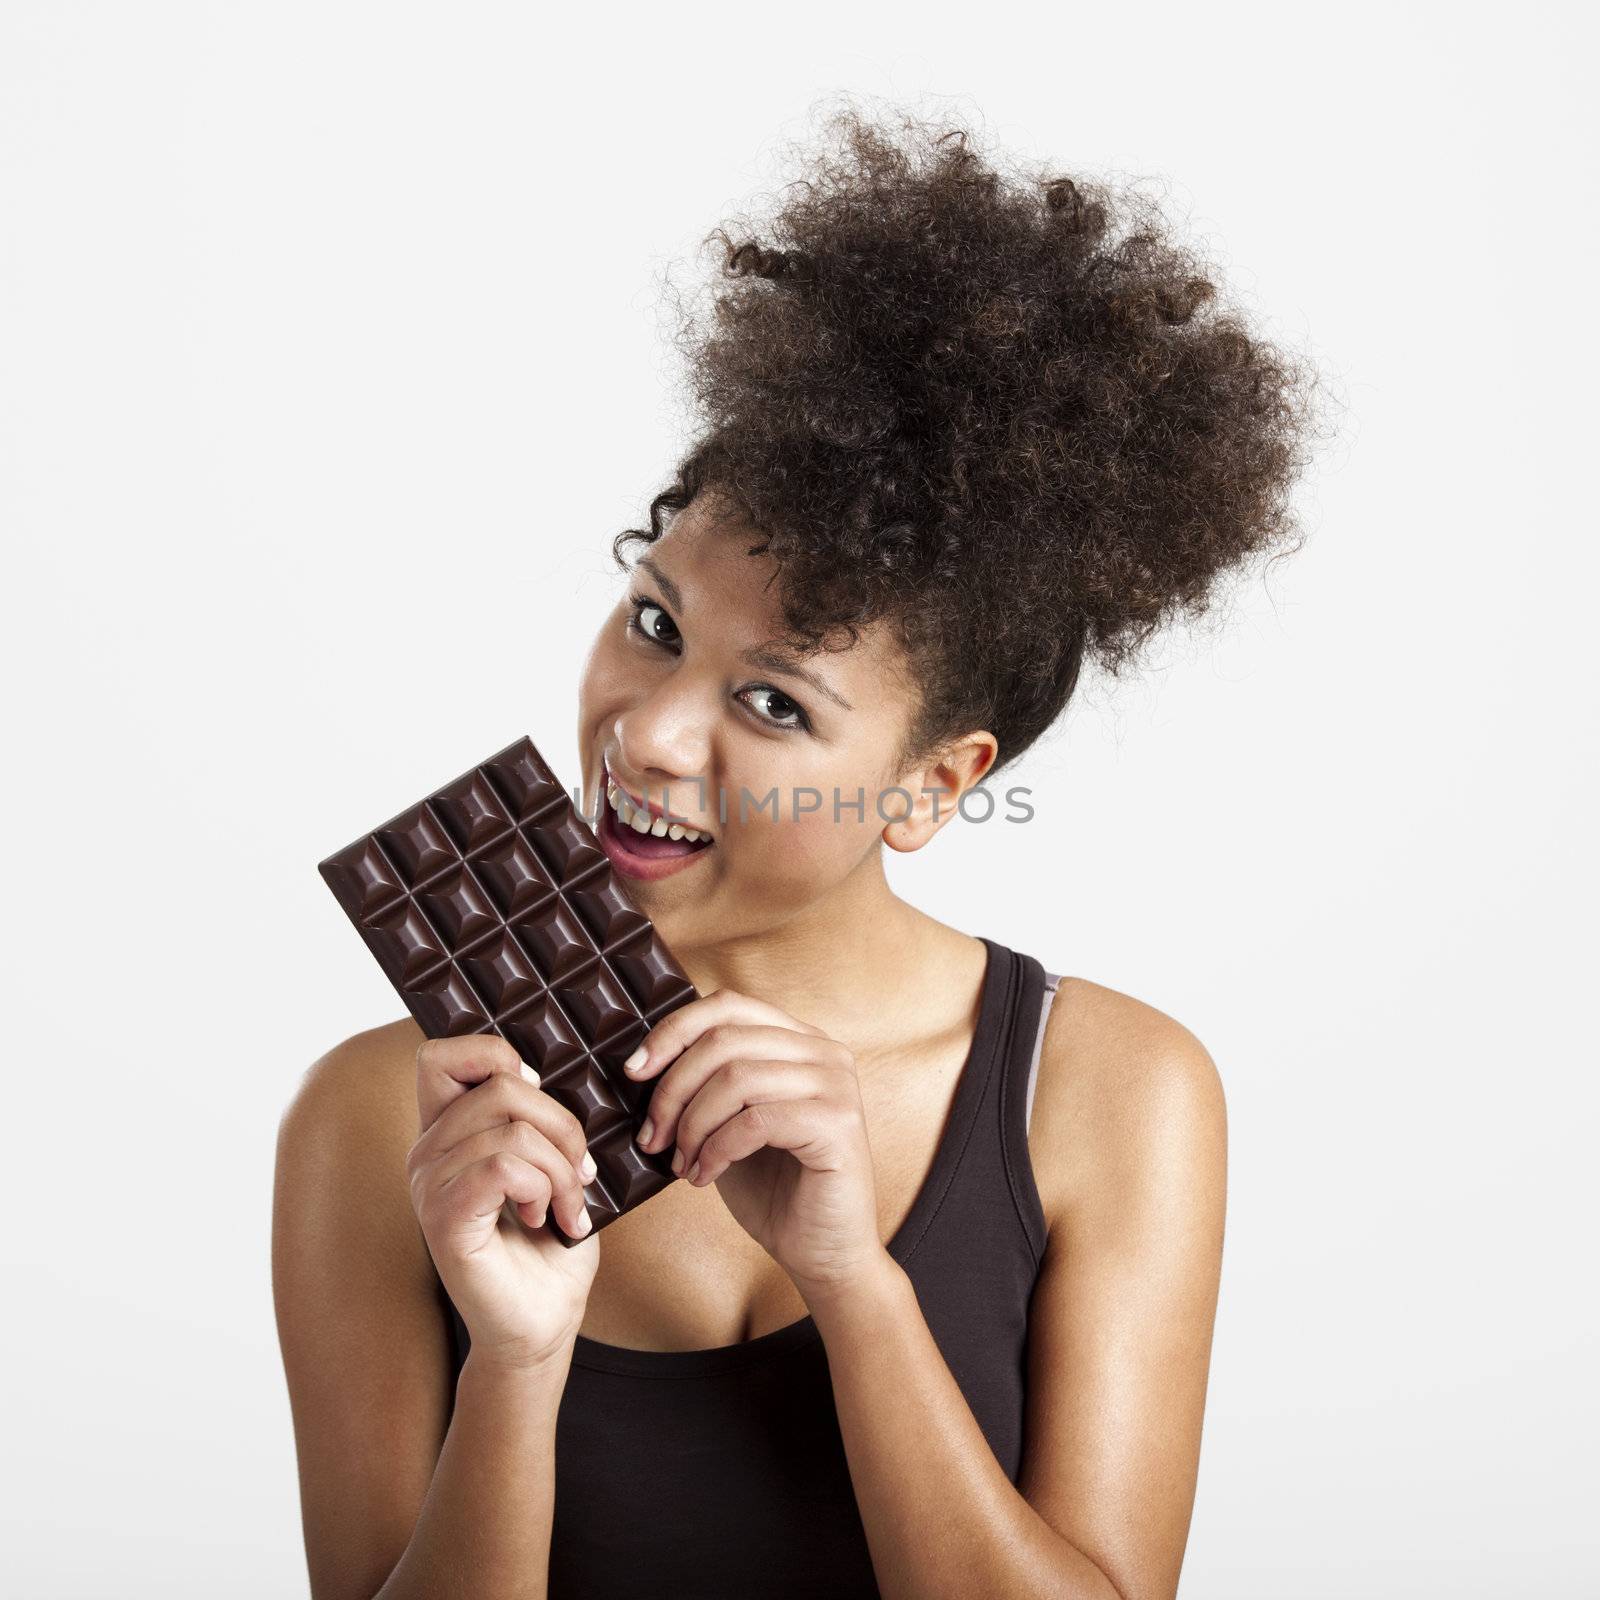 Woman eating chcolate by Iko